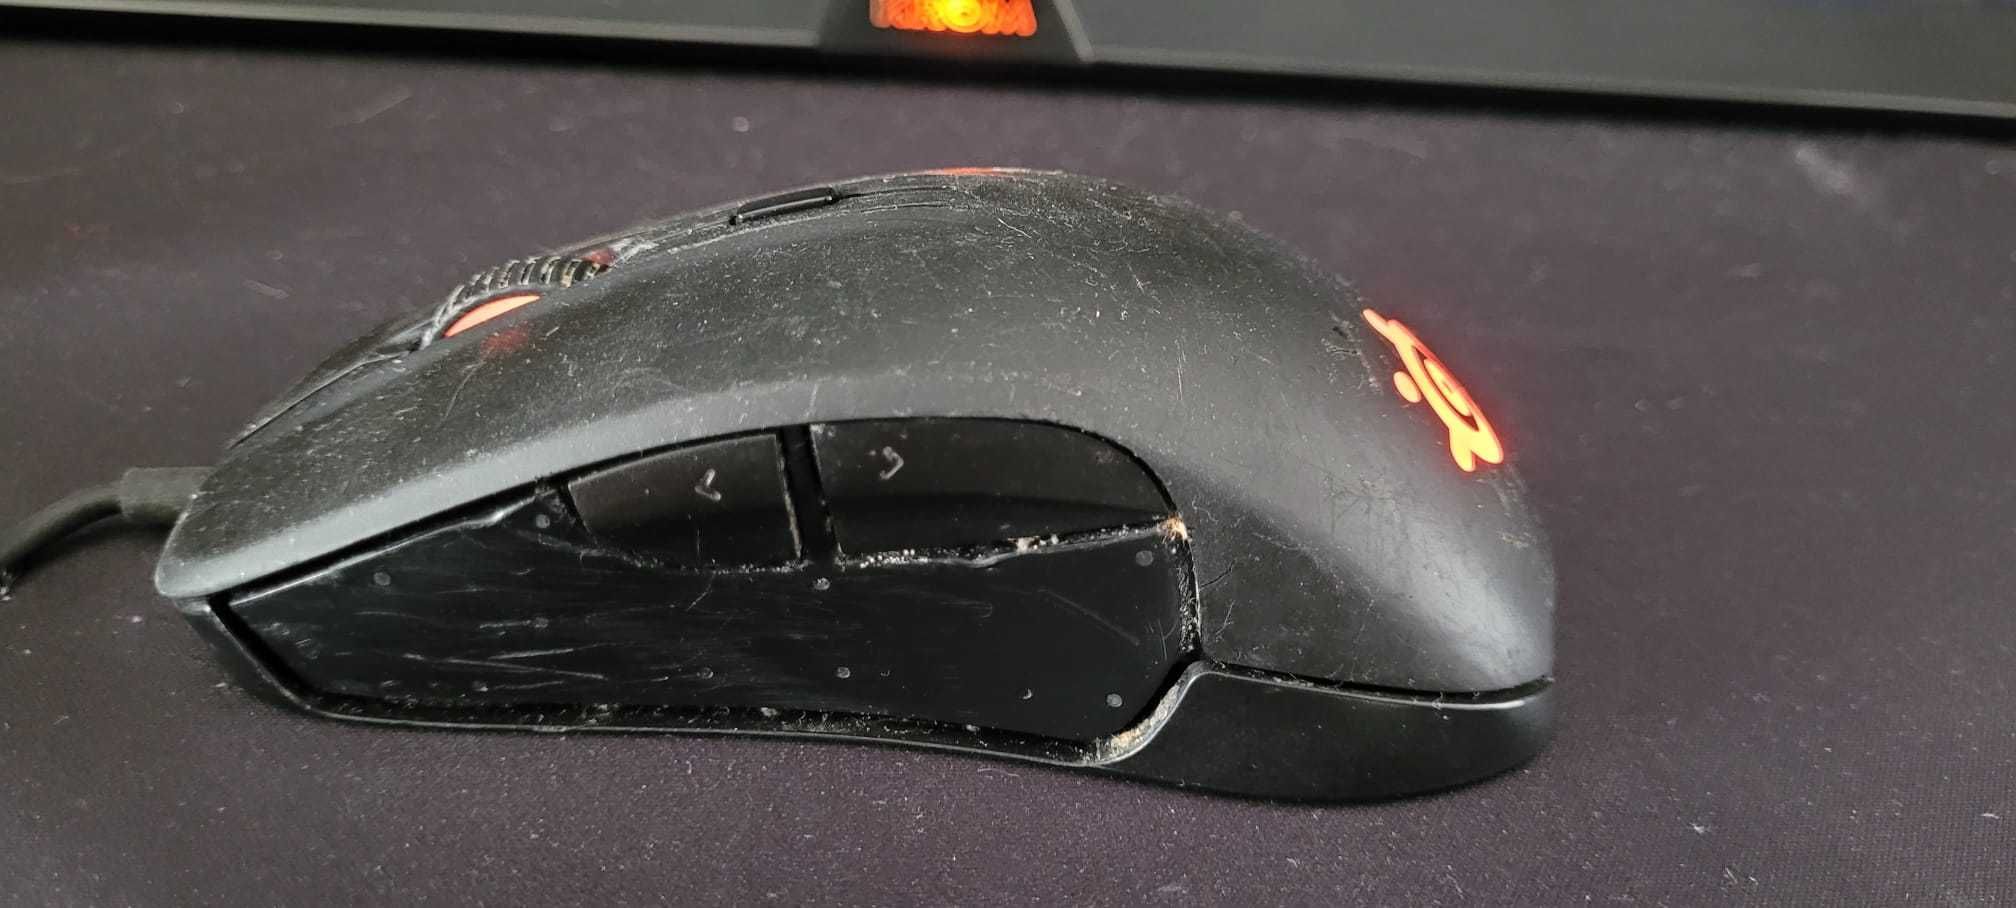 Ratos Gaming Steelseries Rival / Rival 300